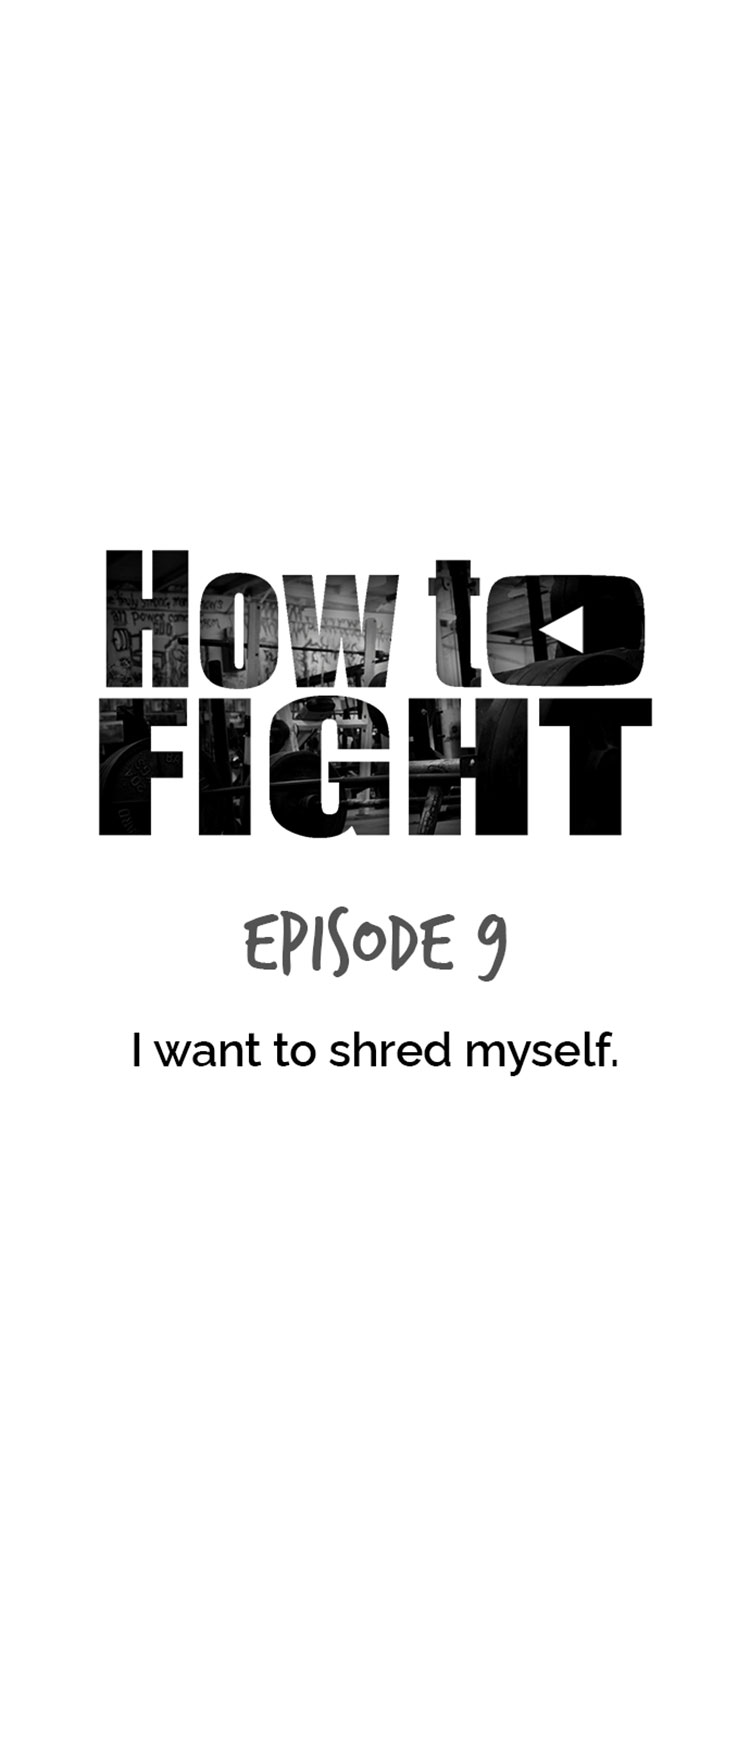 How to Fight image